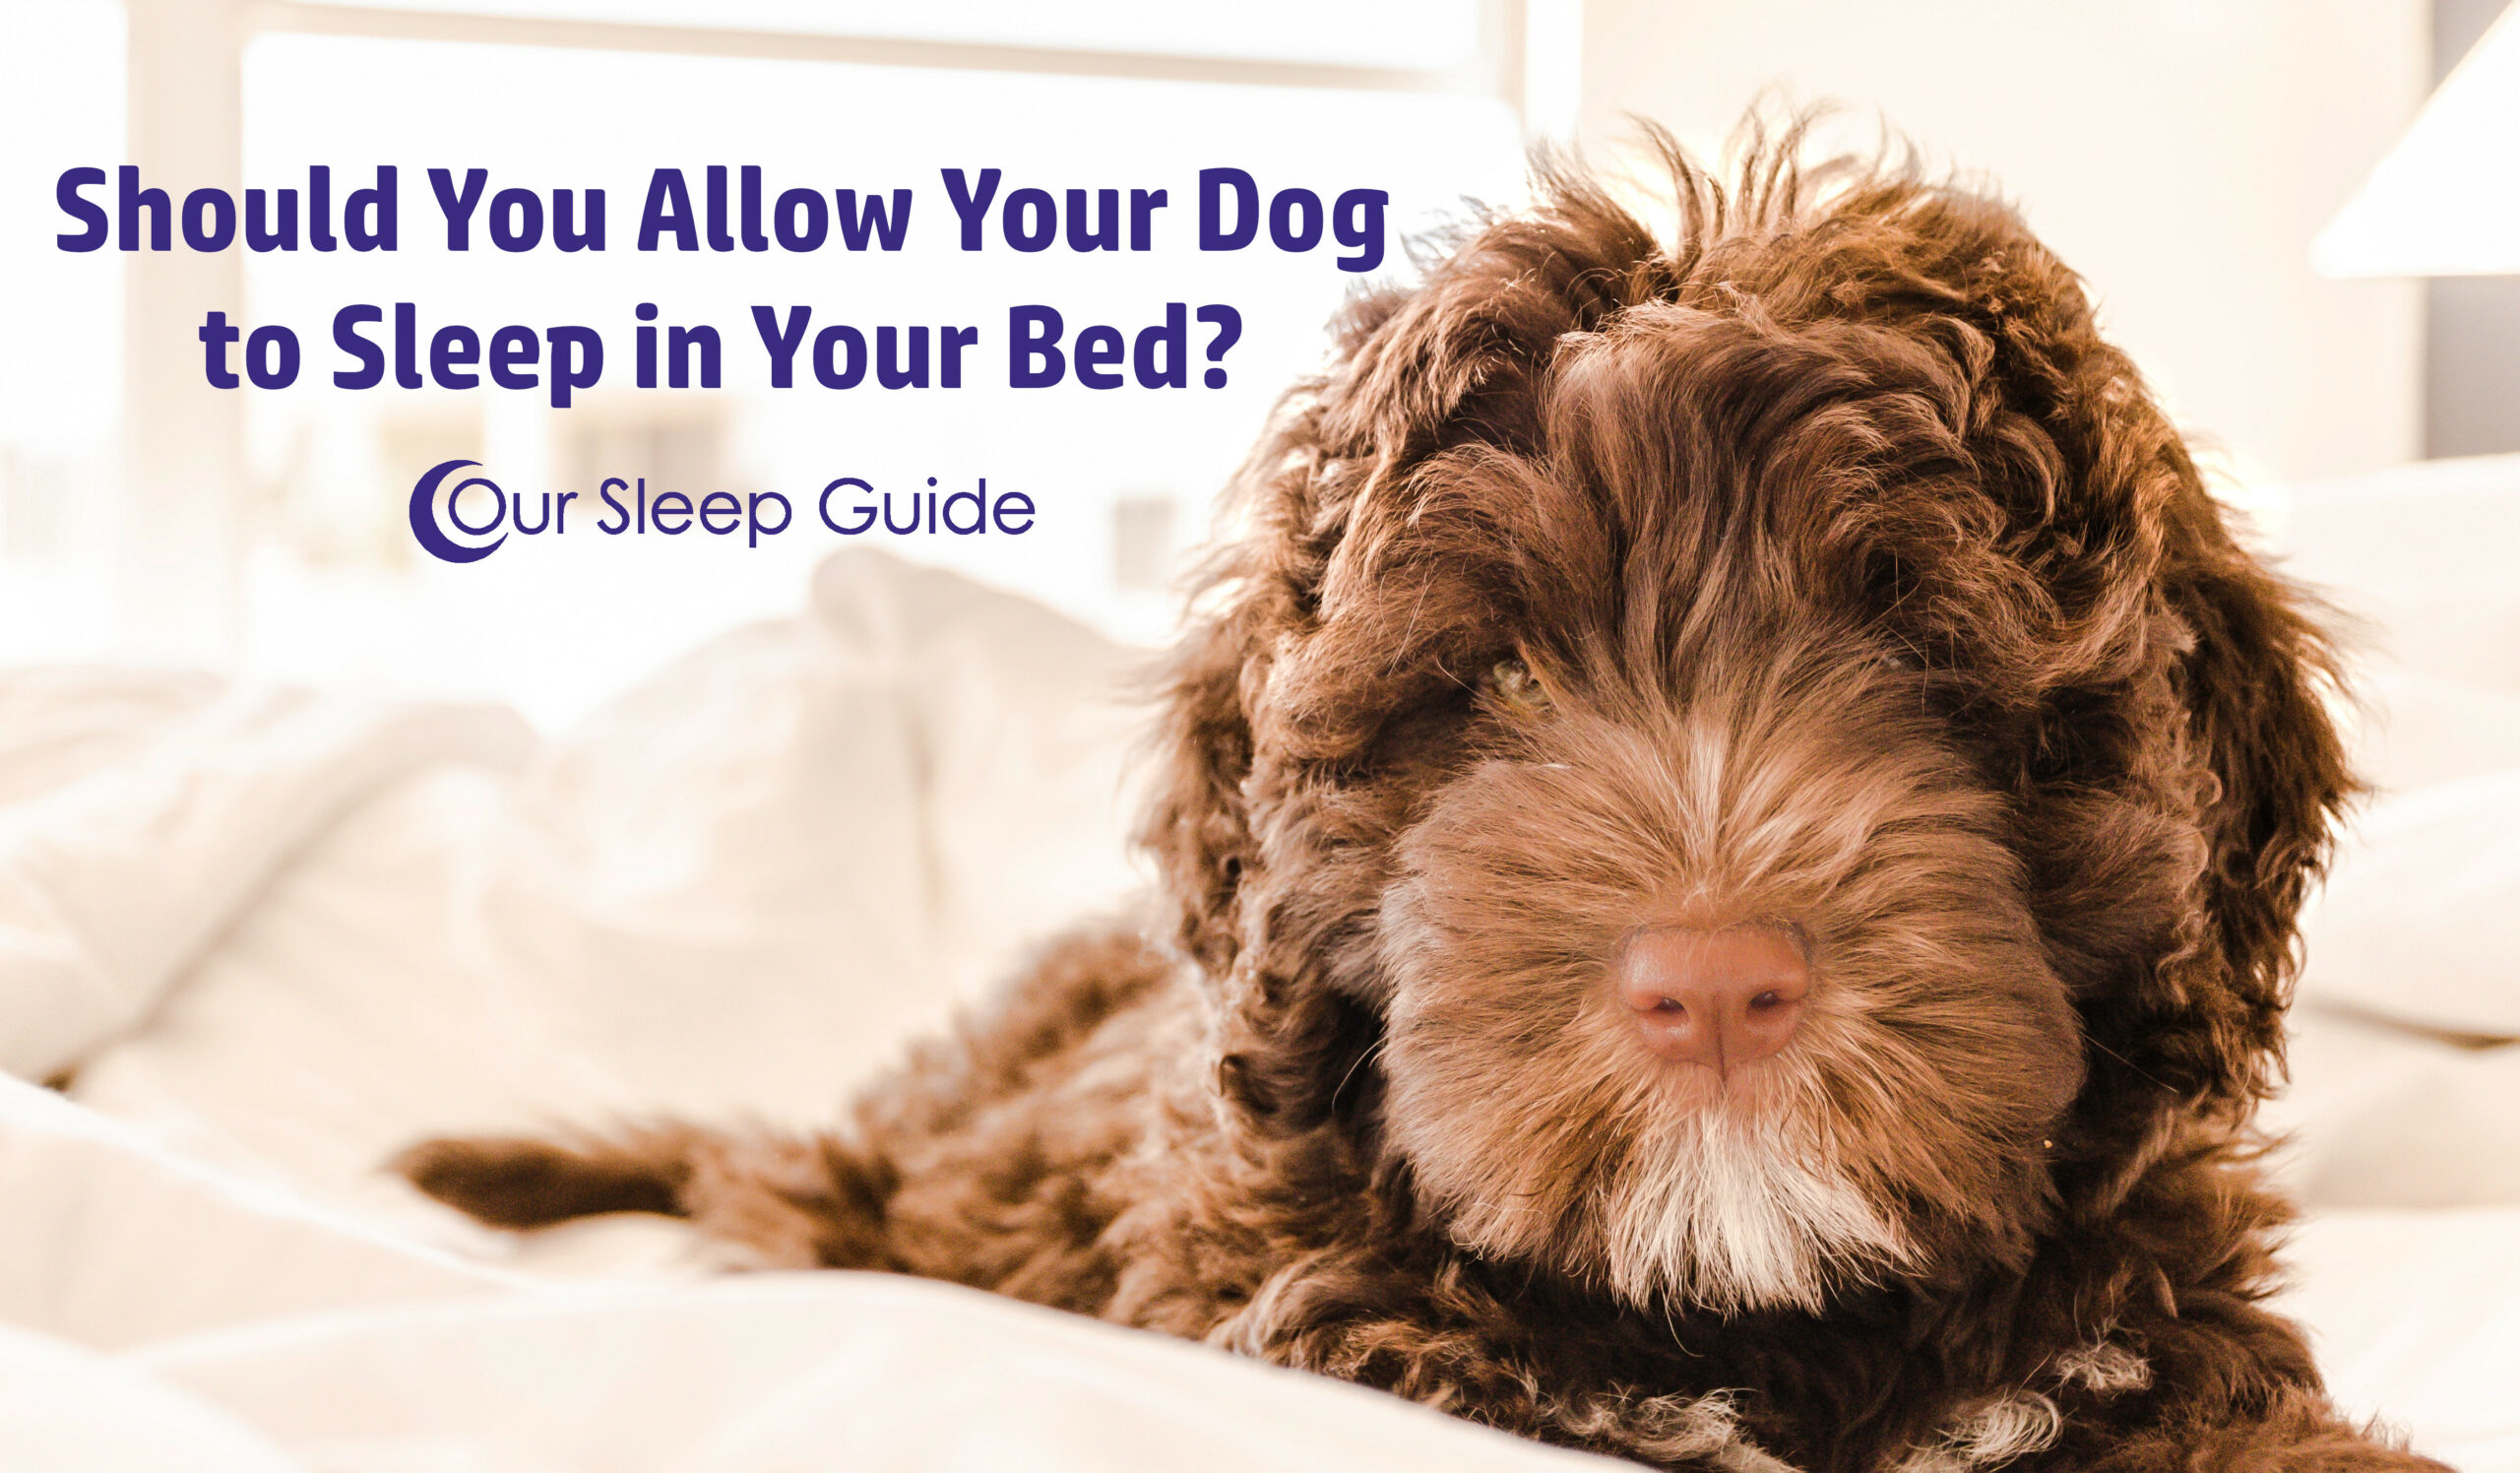 should you allow your dog to sleep in your bed?